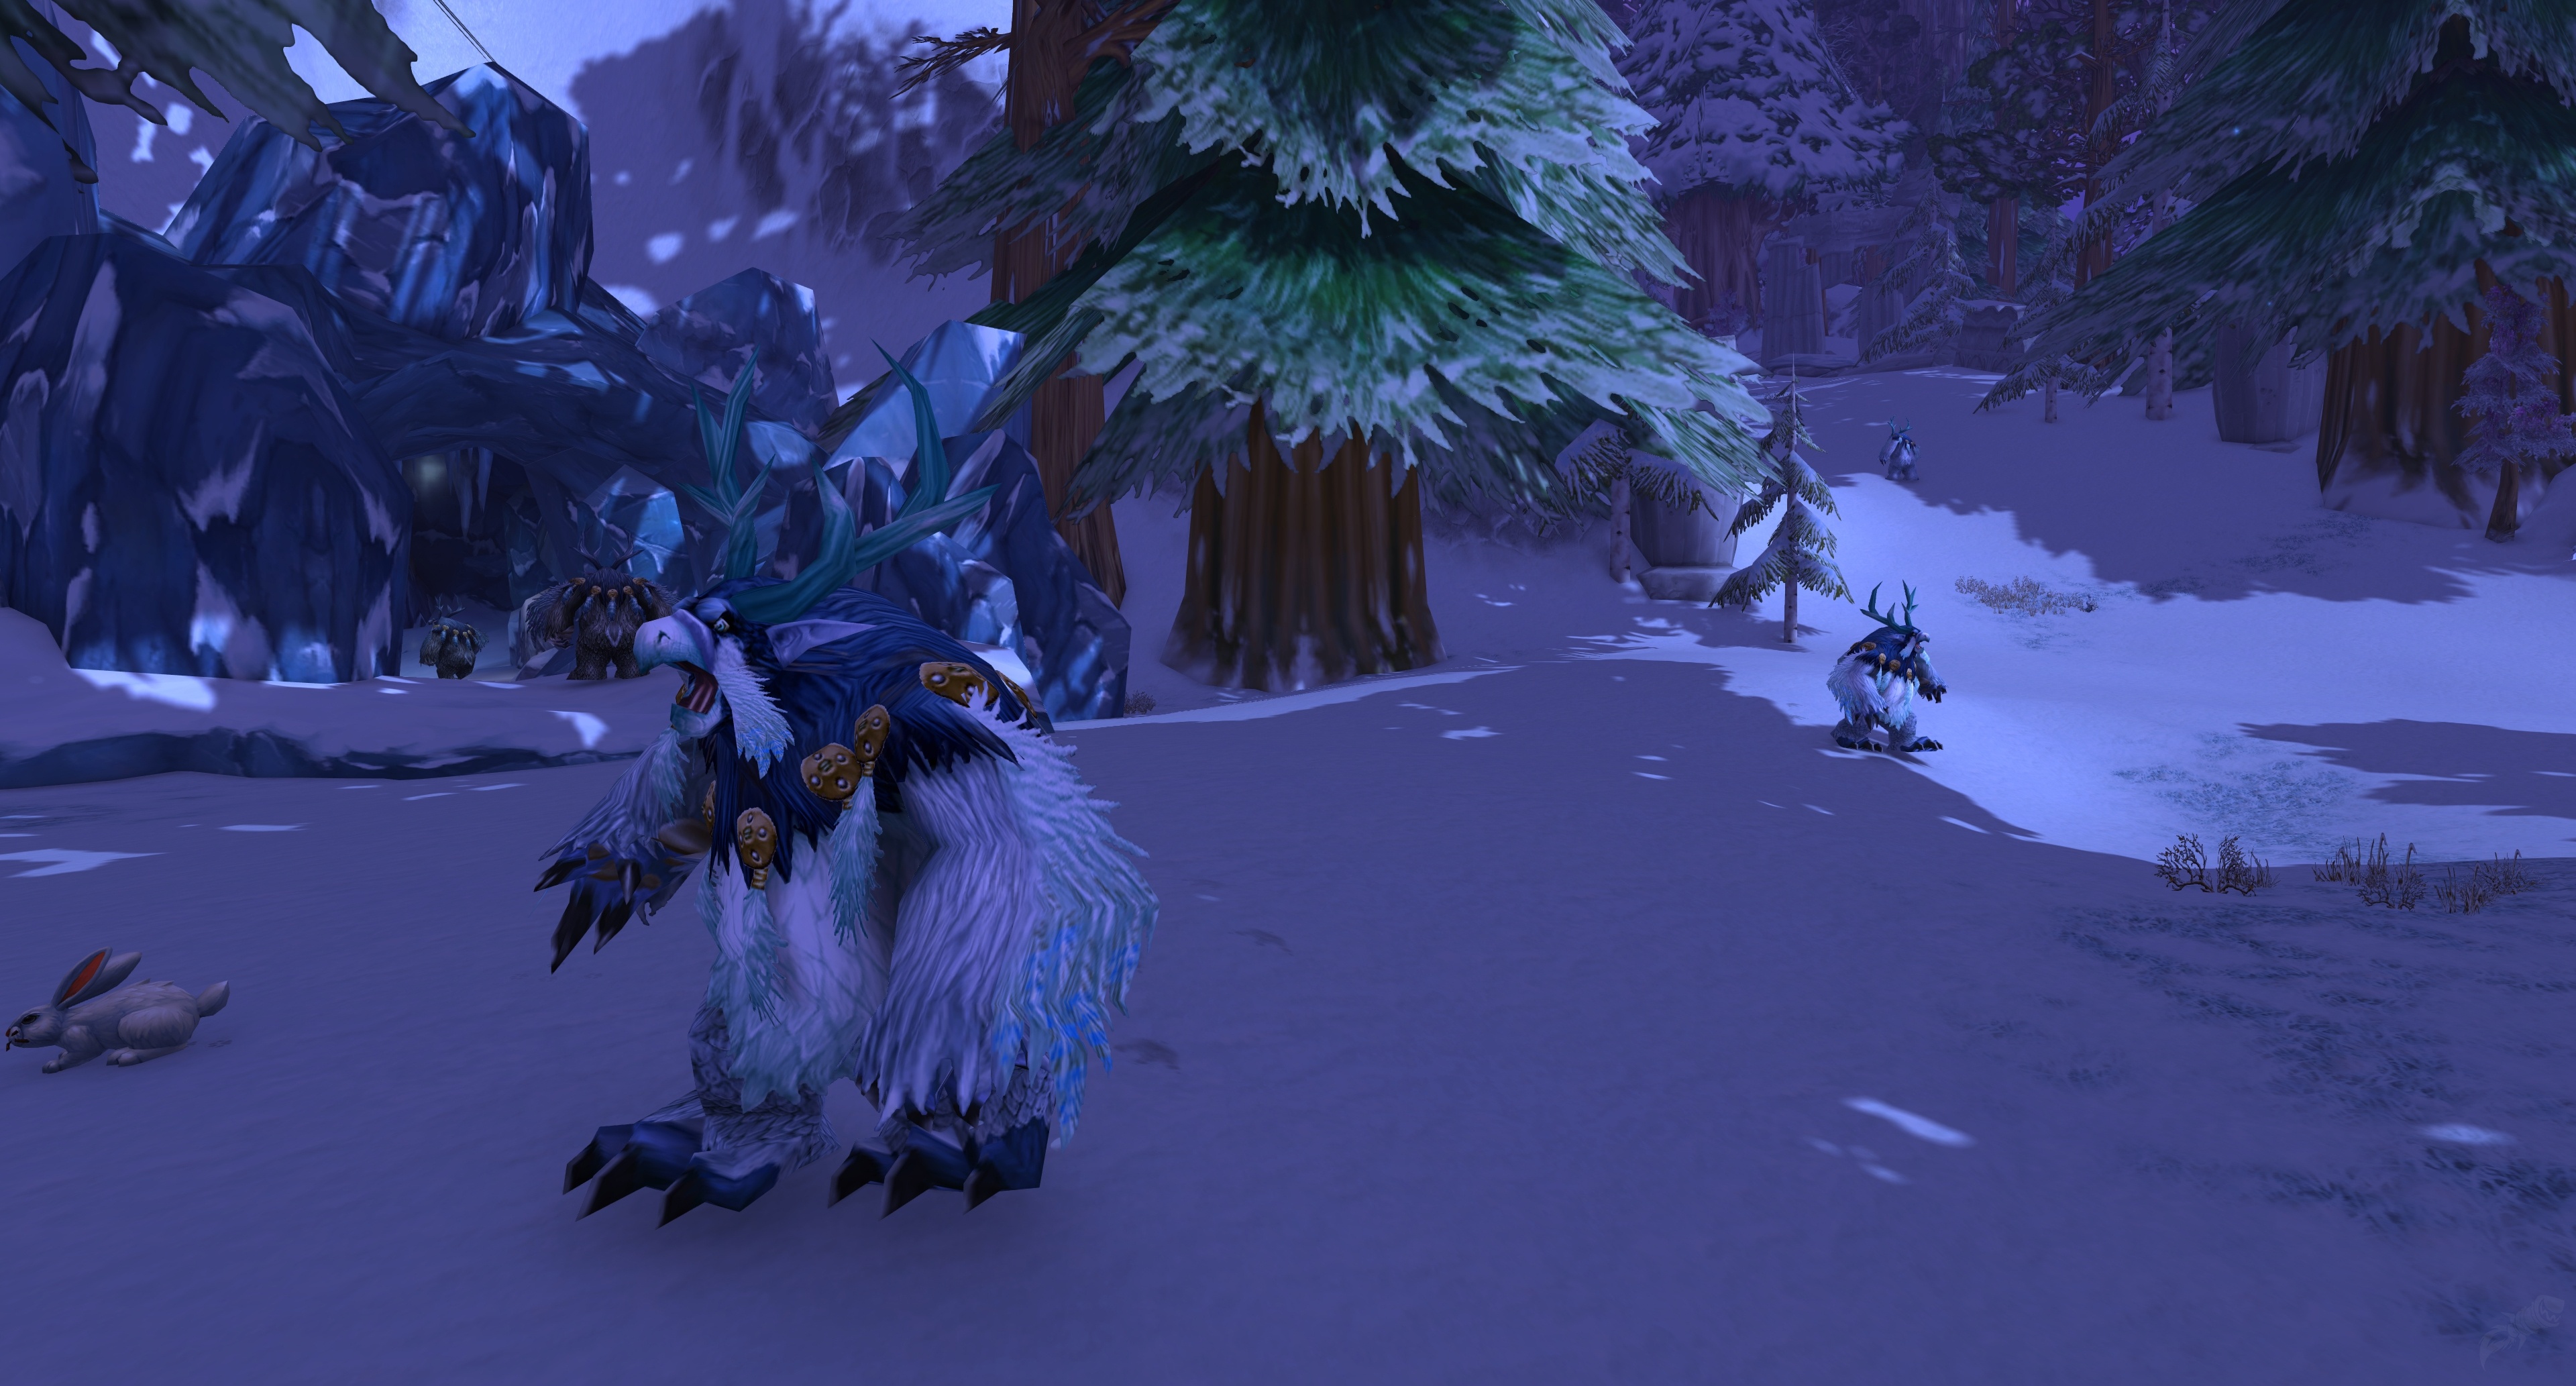 Razor Beak and Antlers Pointy - Quest - World of Warcraft